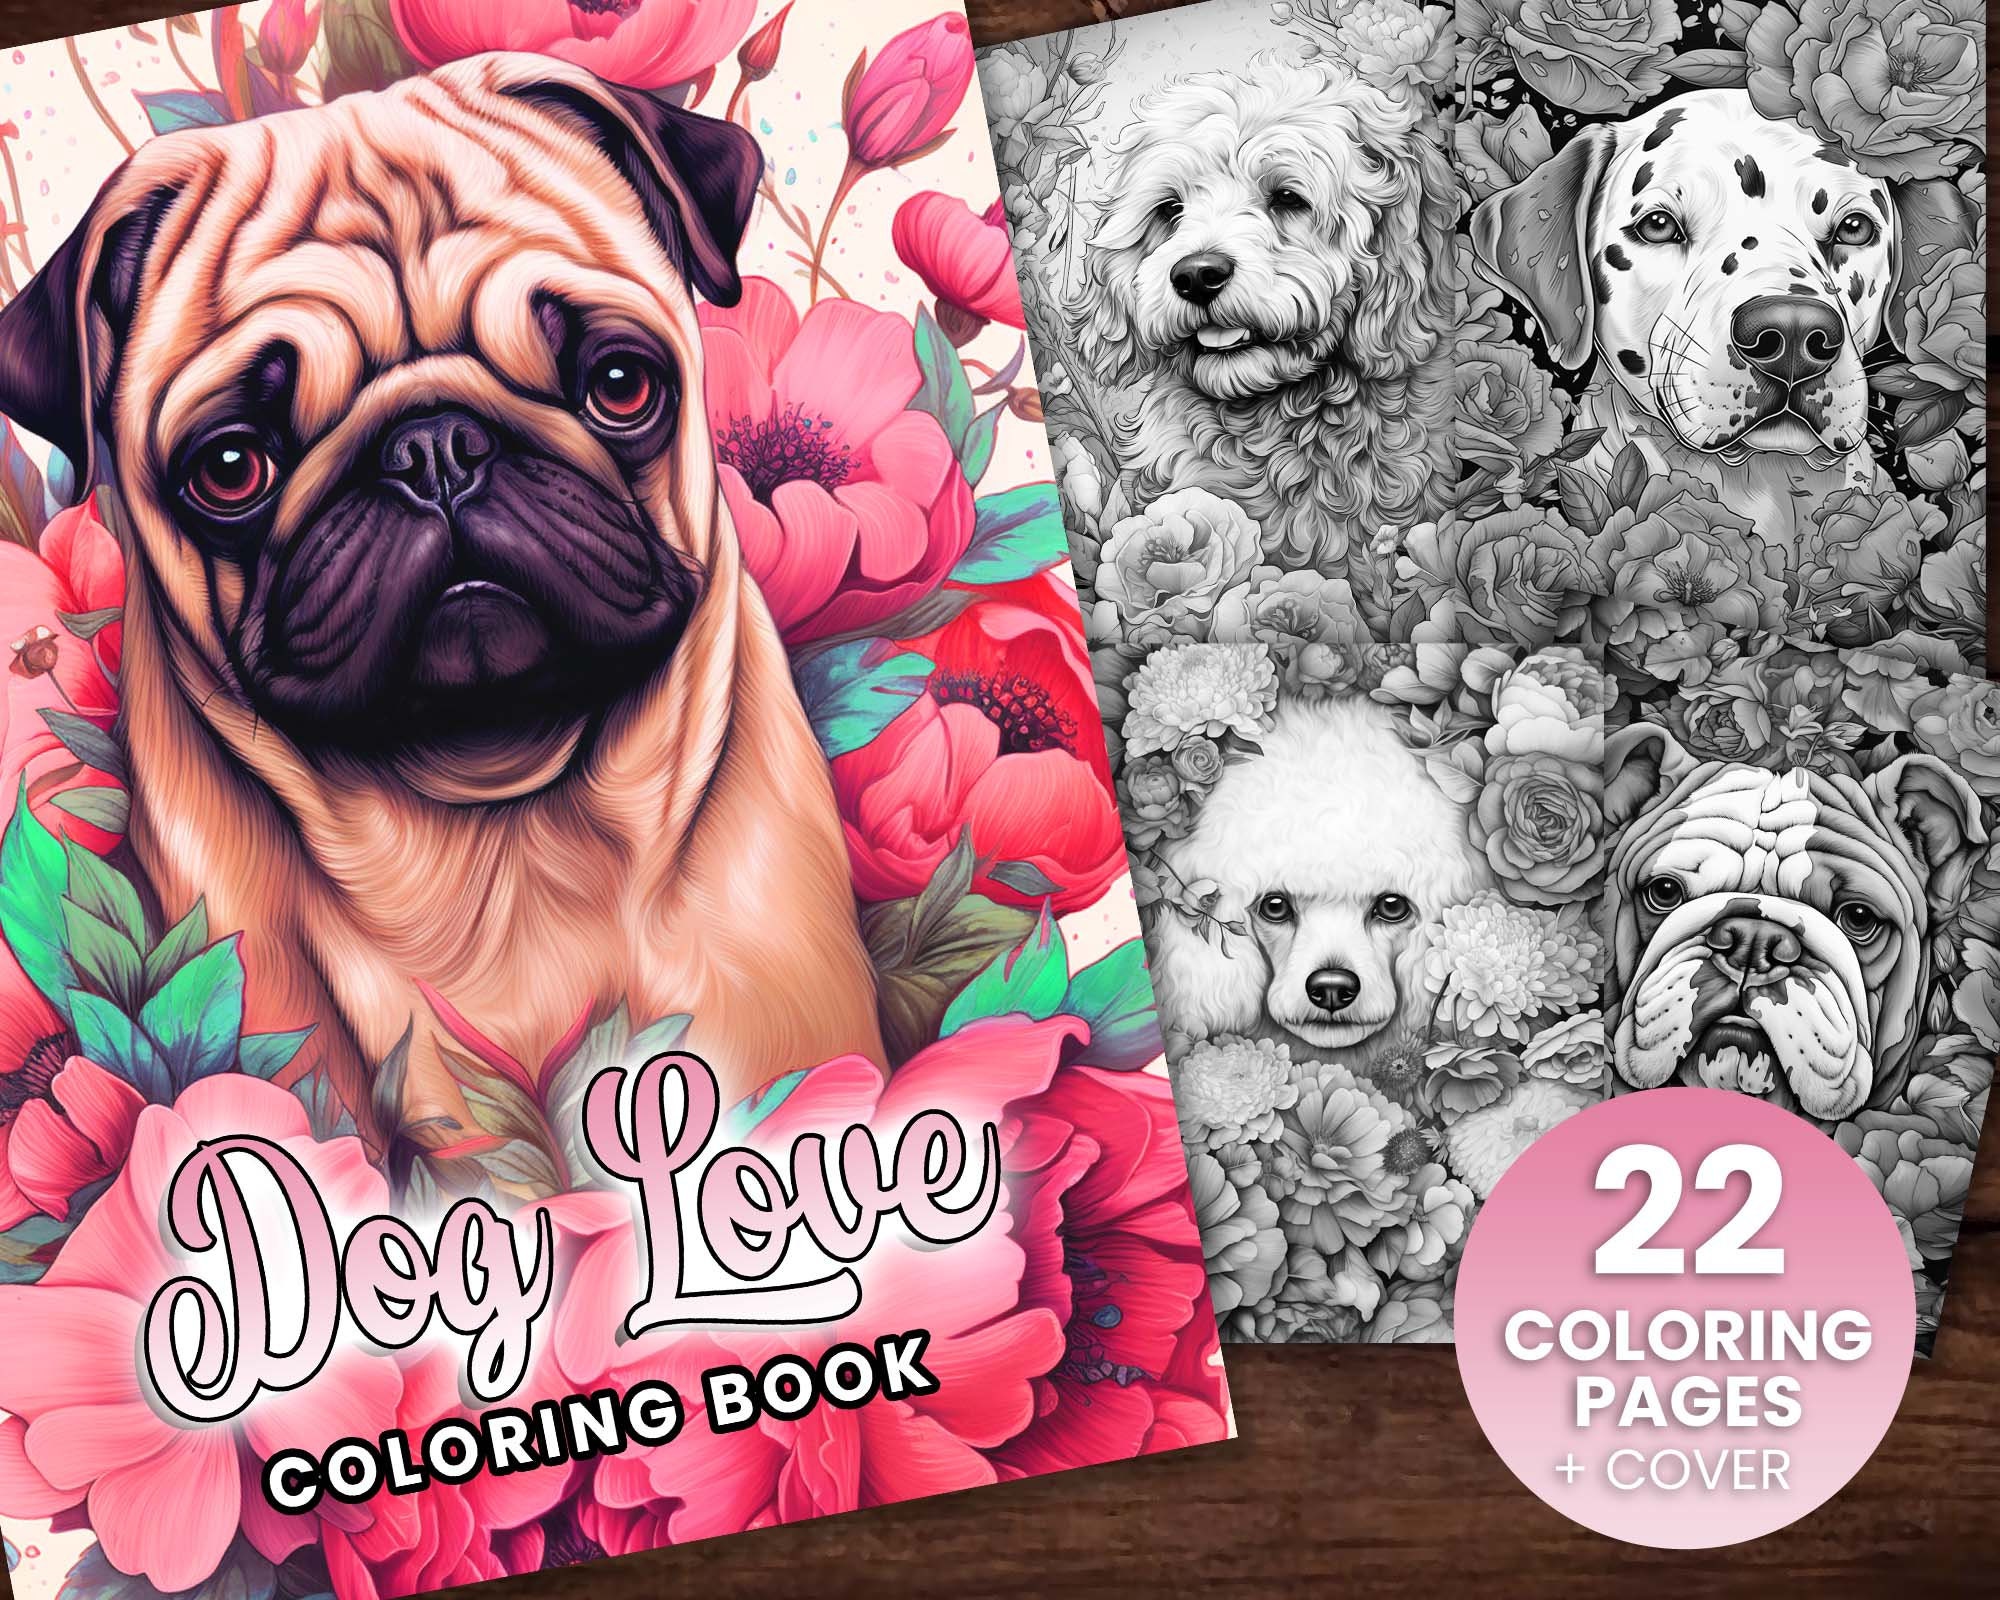 Dogs With Mandalas Adult Coloring Book: Love Dogs Beautiful Cute Dogs for  Stress Relief and Relaxation 30 Pages 8.5 X 11 DOWNLOAD 